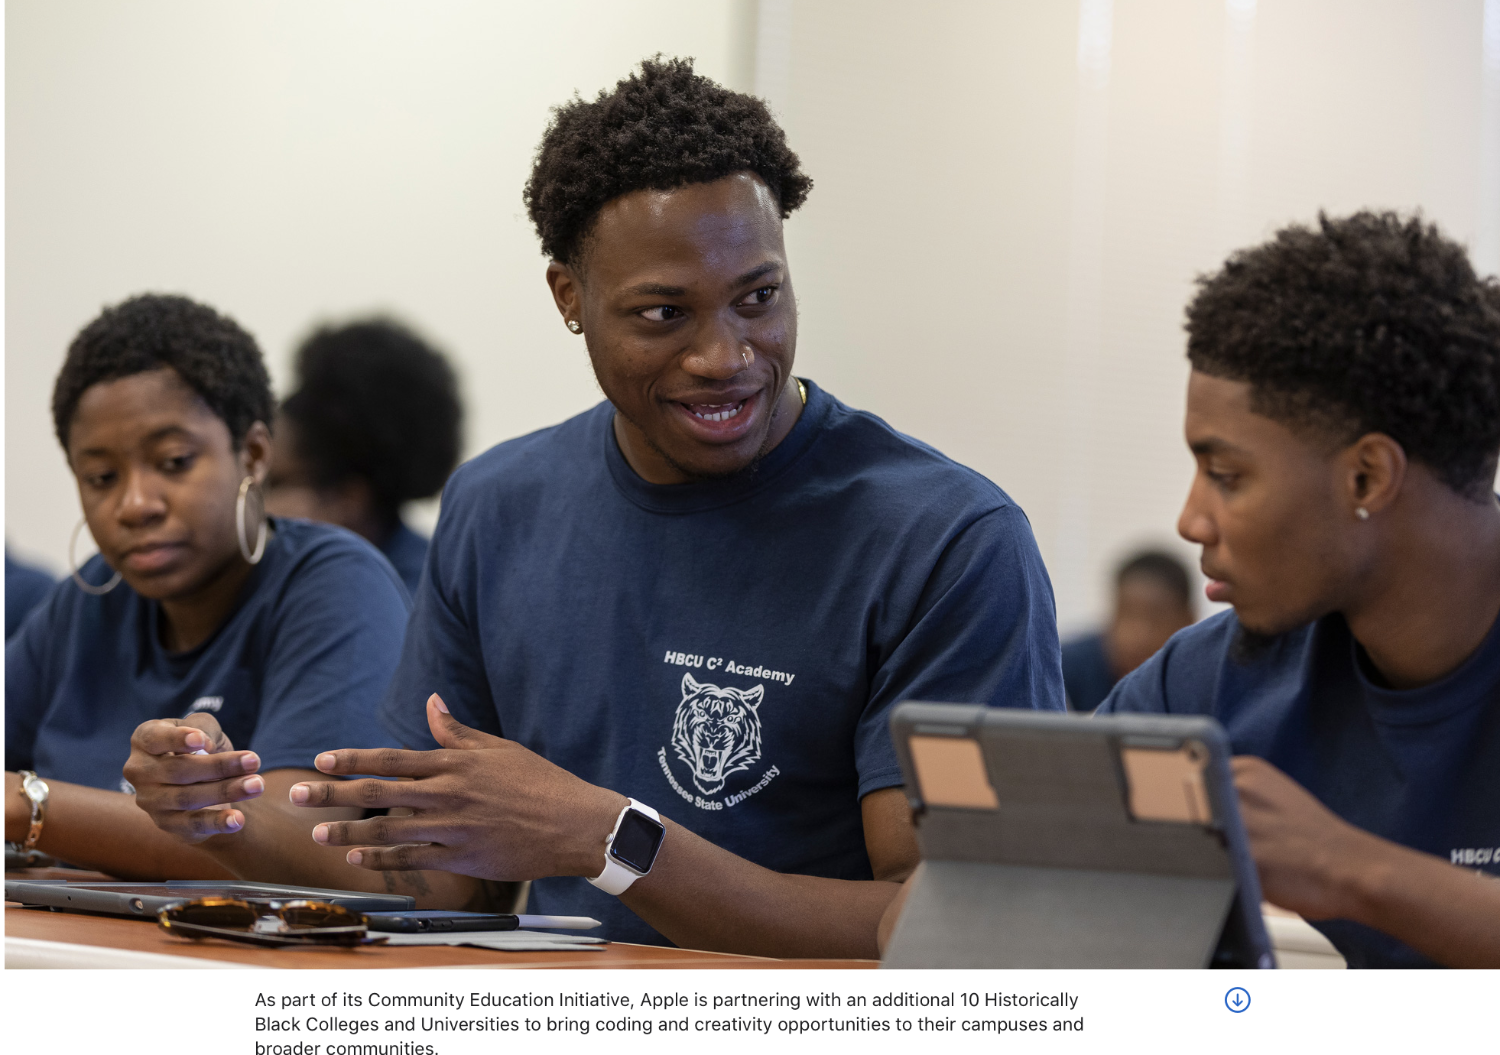 Apple teams up with HBCUs to bring coding and creativity opportunities to communities across the US